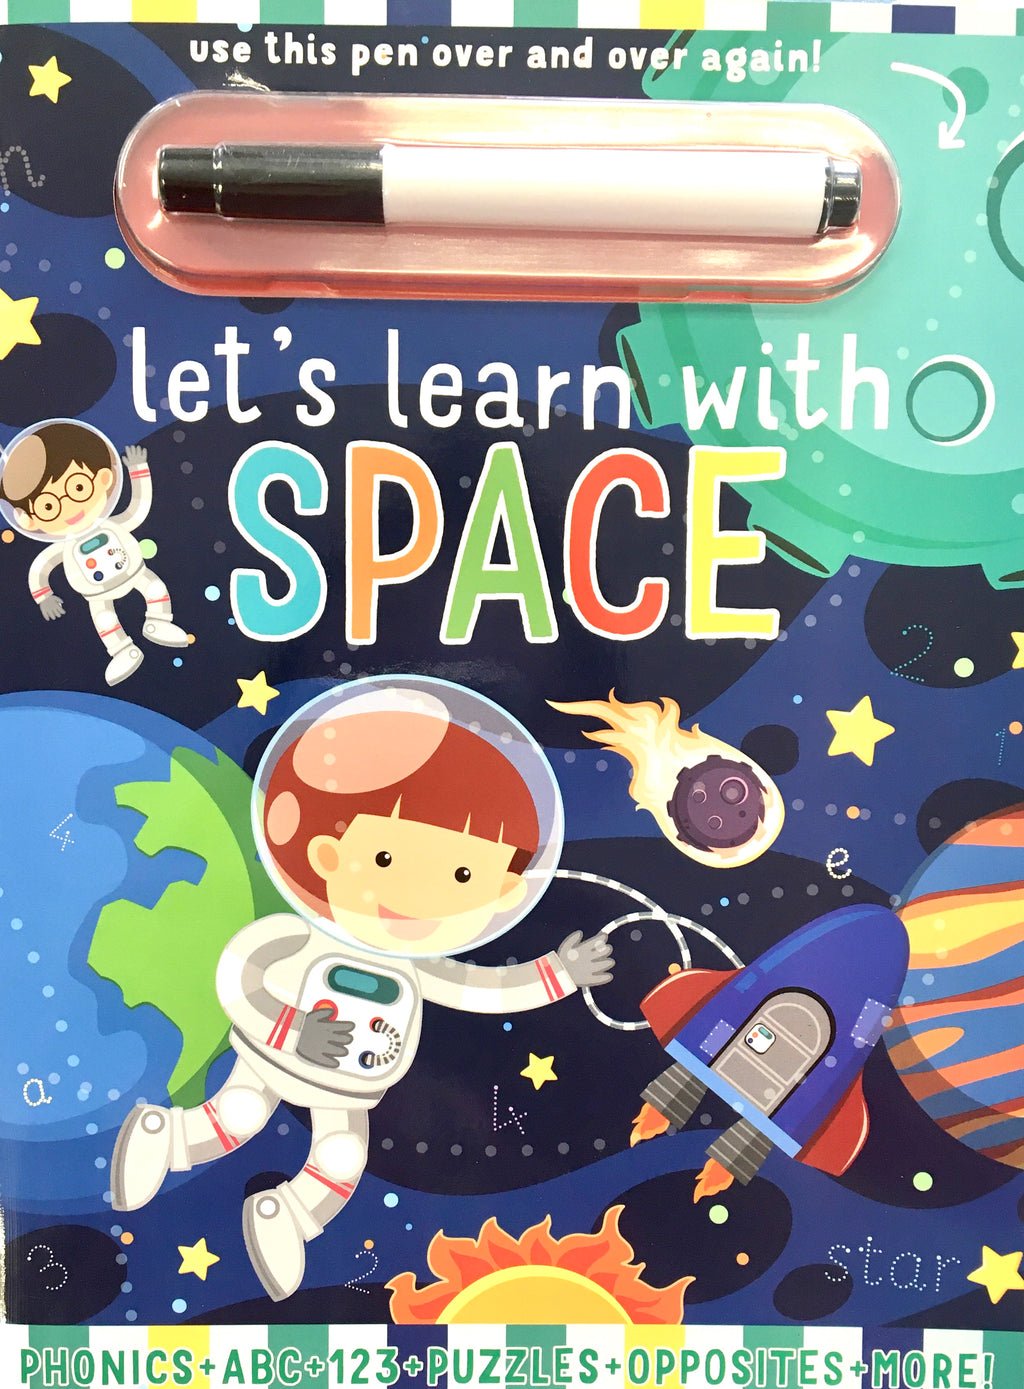 Let's learn with Space